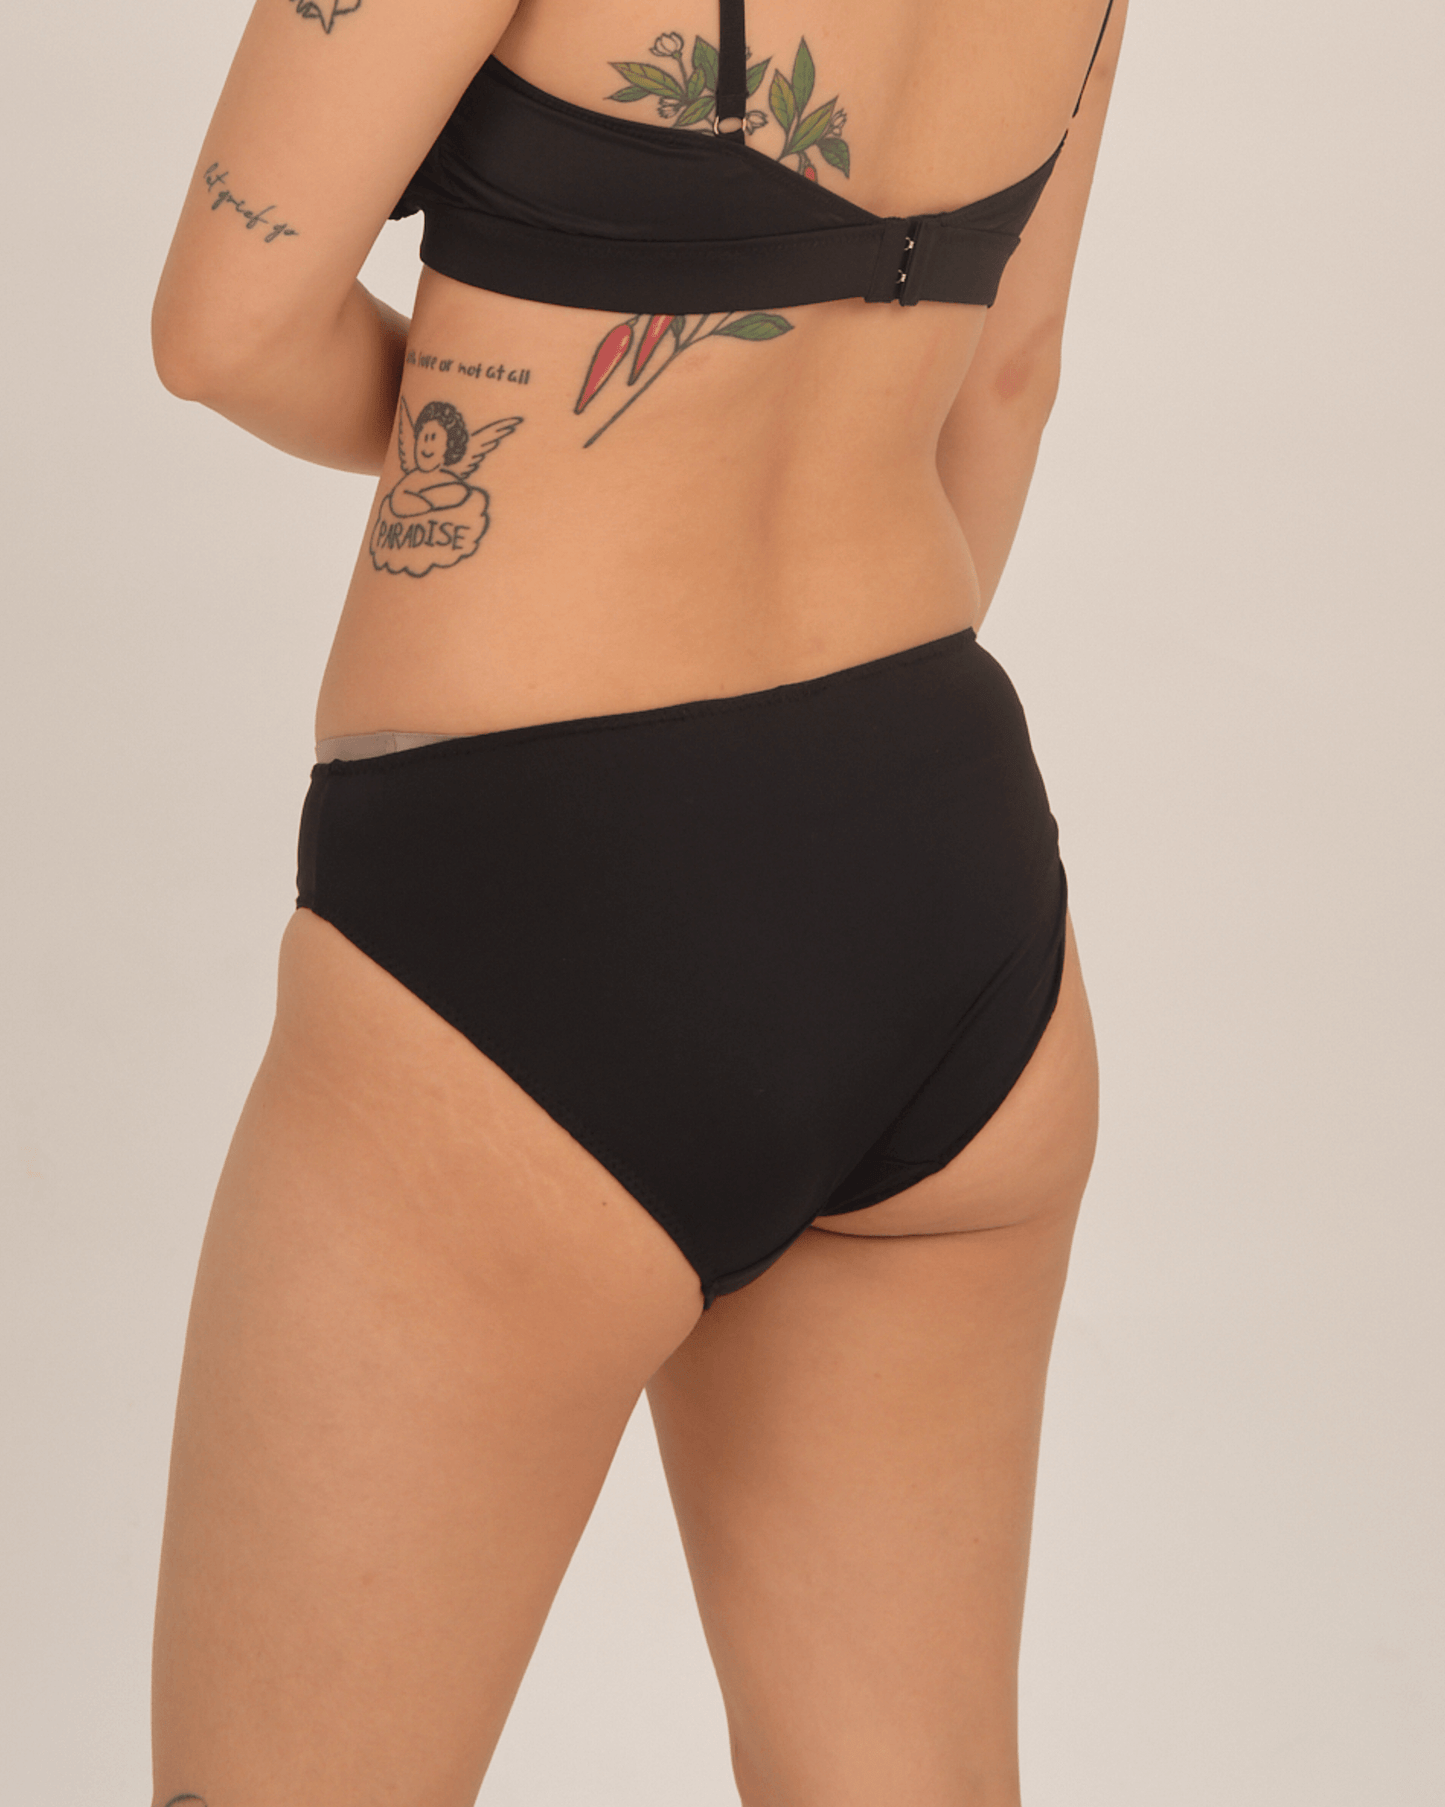 elevated basics panty in #100